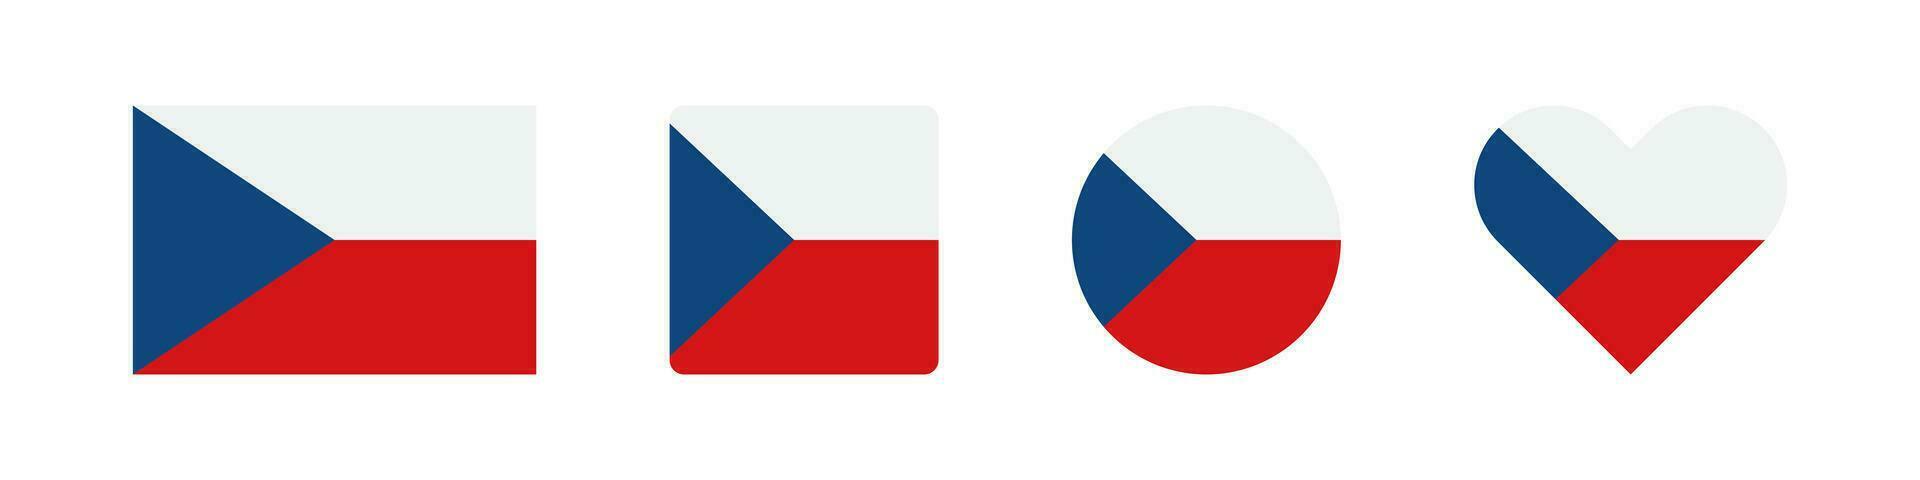 Czech icon. Czech flag signs. National badge symbol. Europe country symbols. Culture sticker icons. Vector isolated sign.